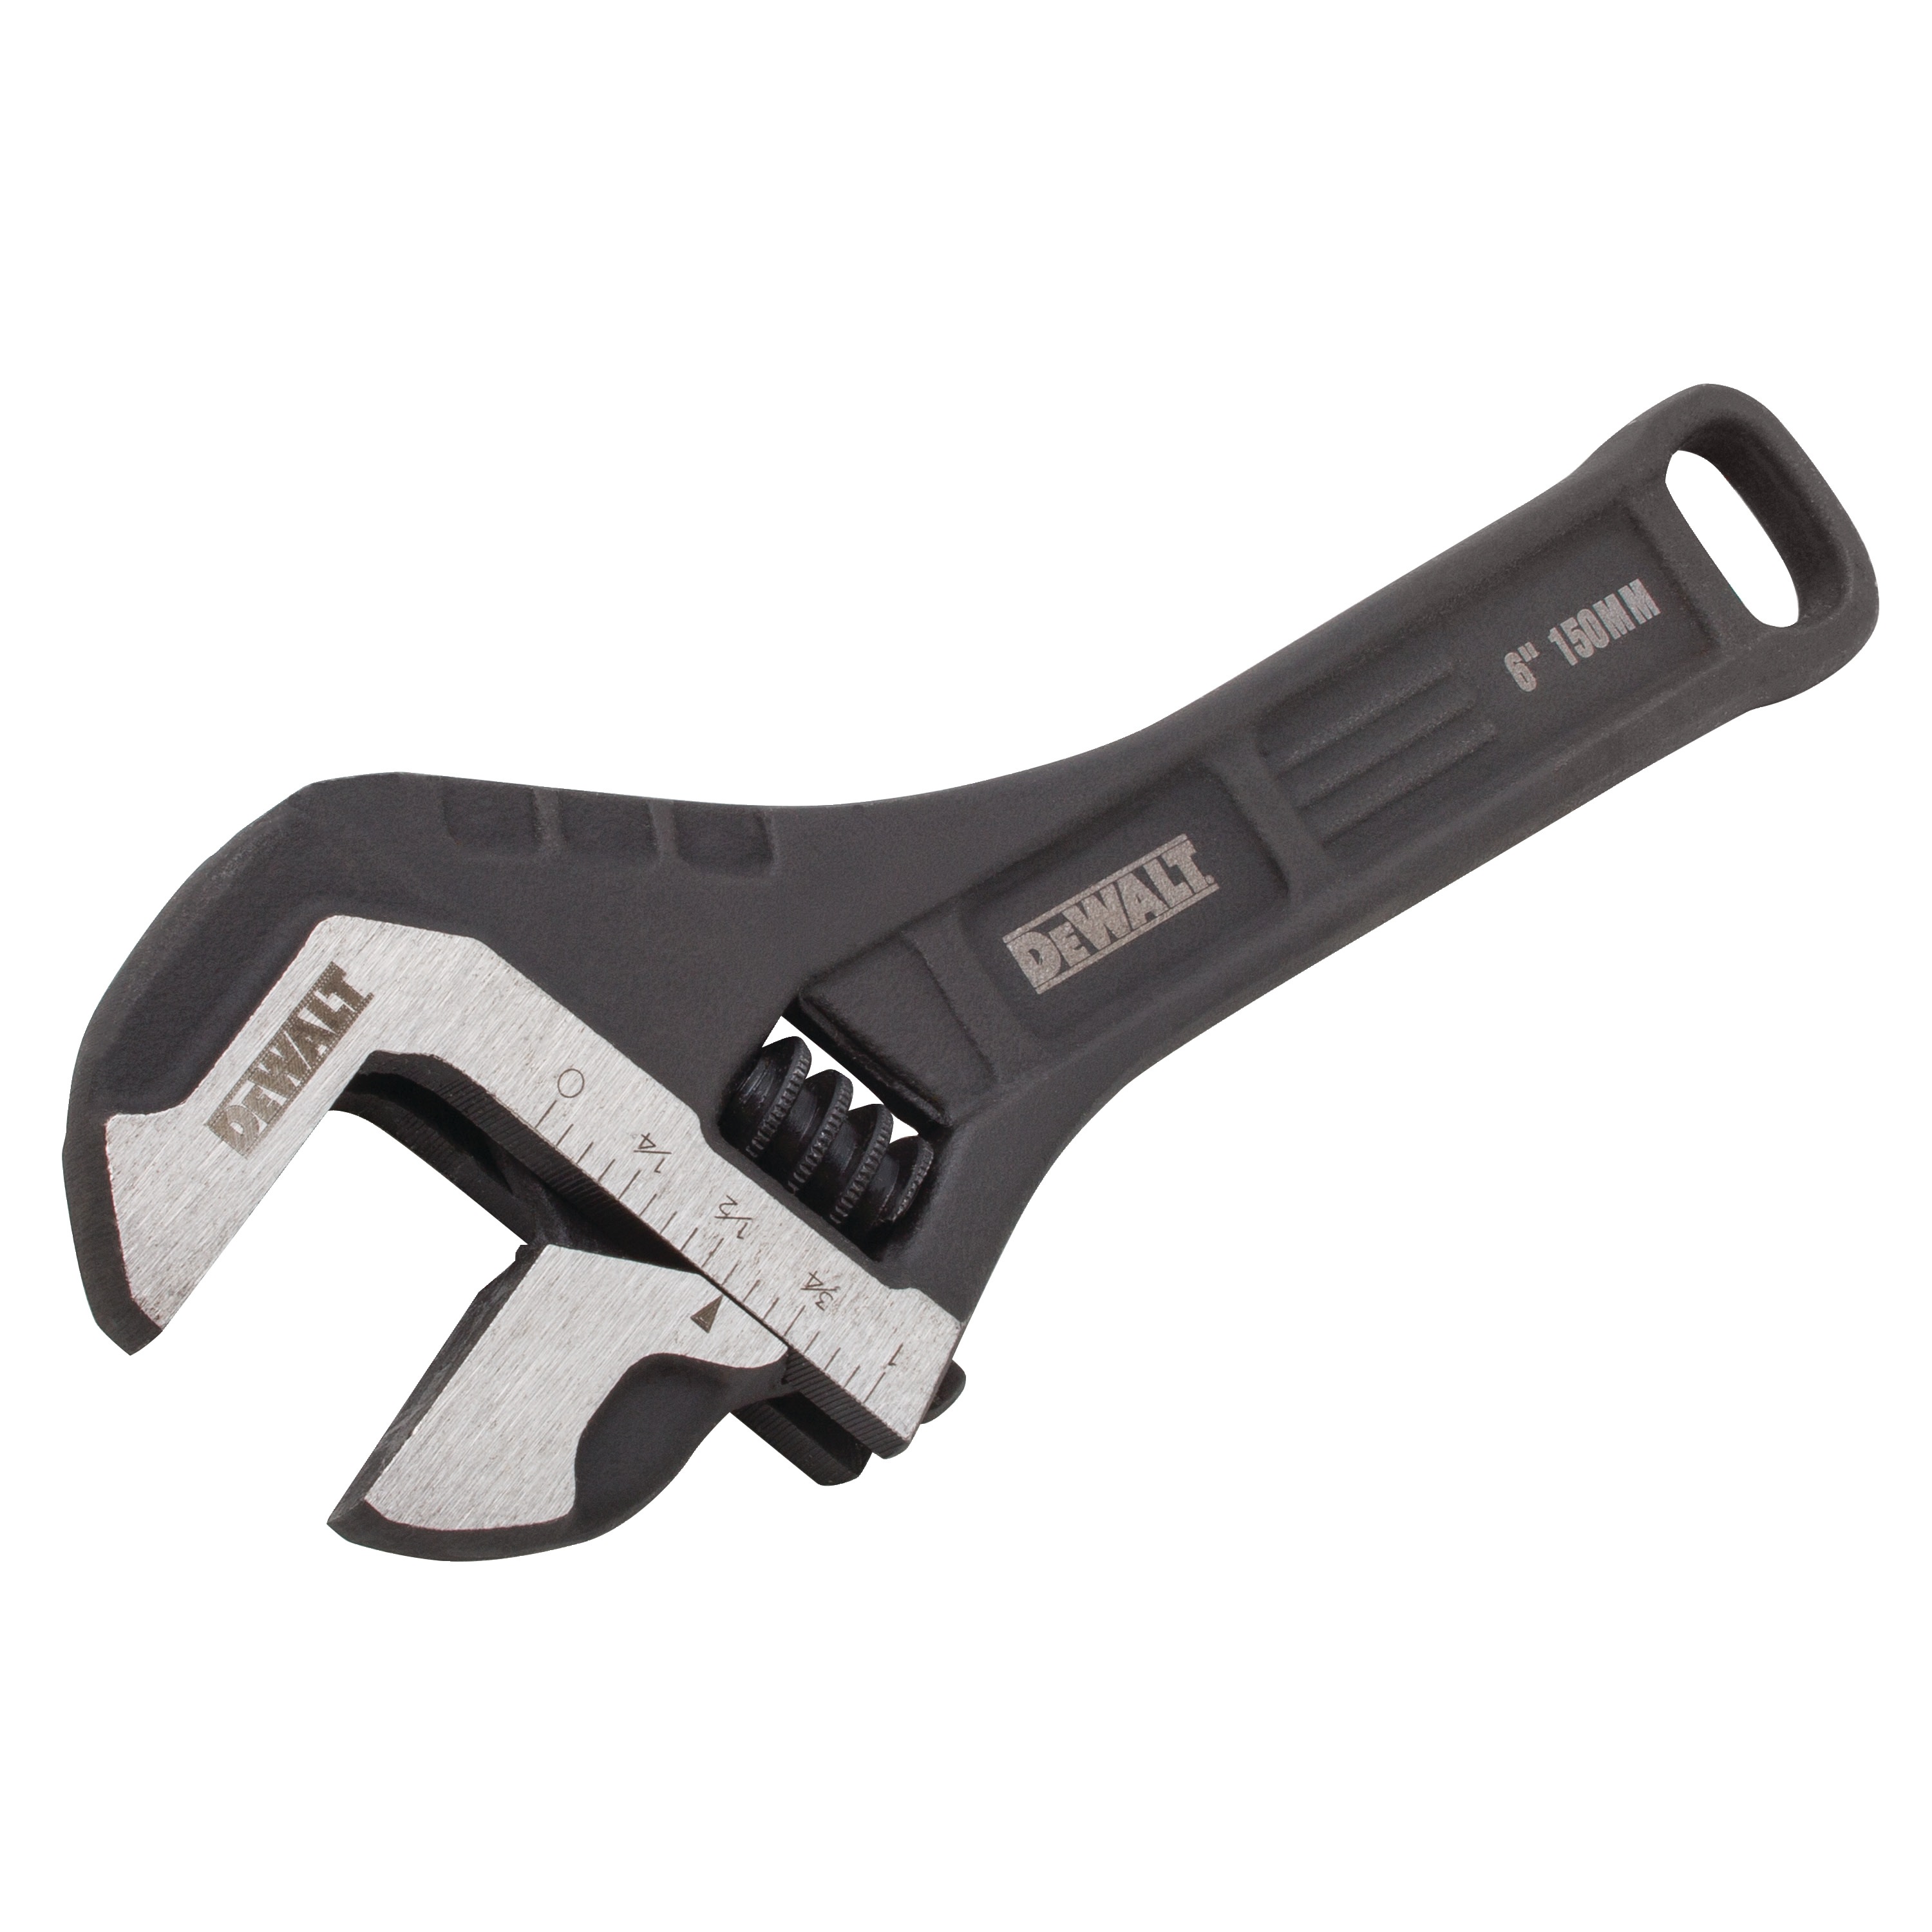 Profile of  6 inch All Steel Adjustable Wrench.